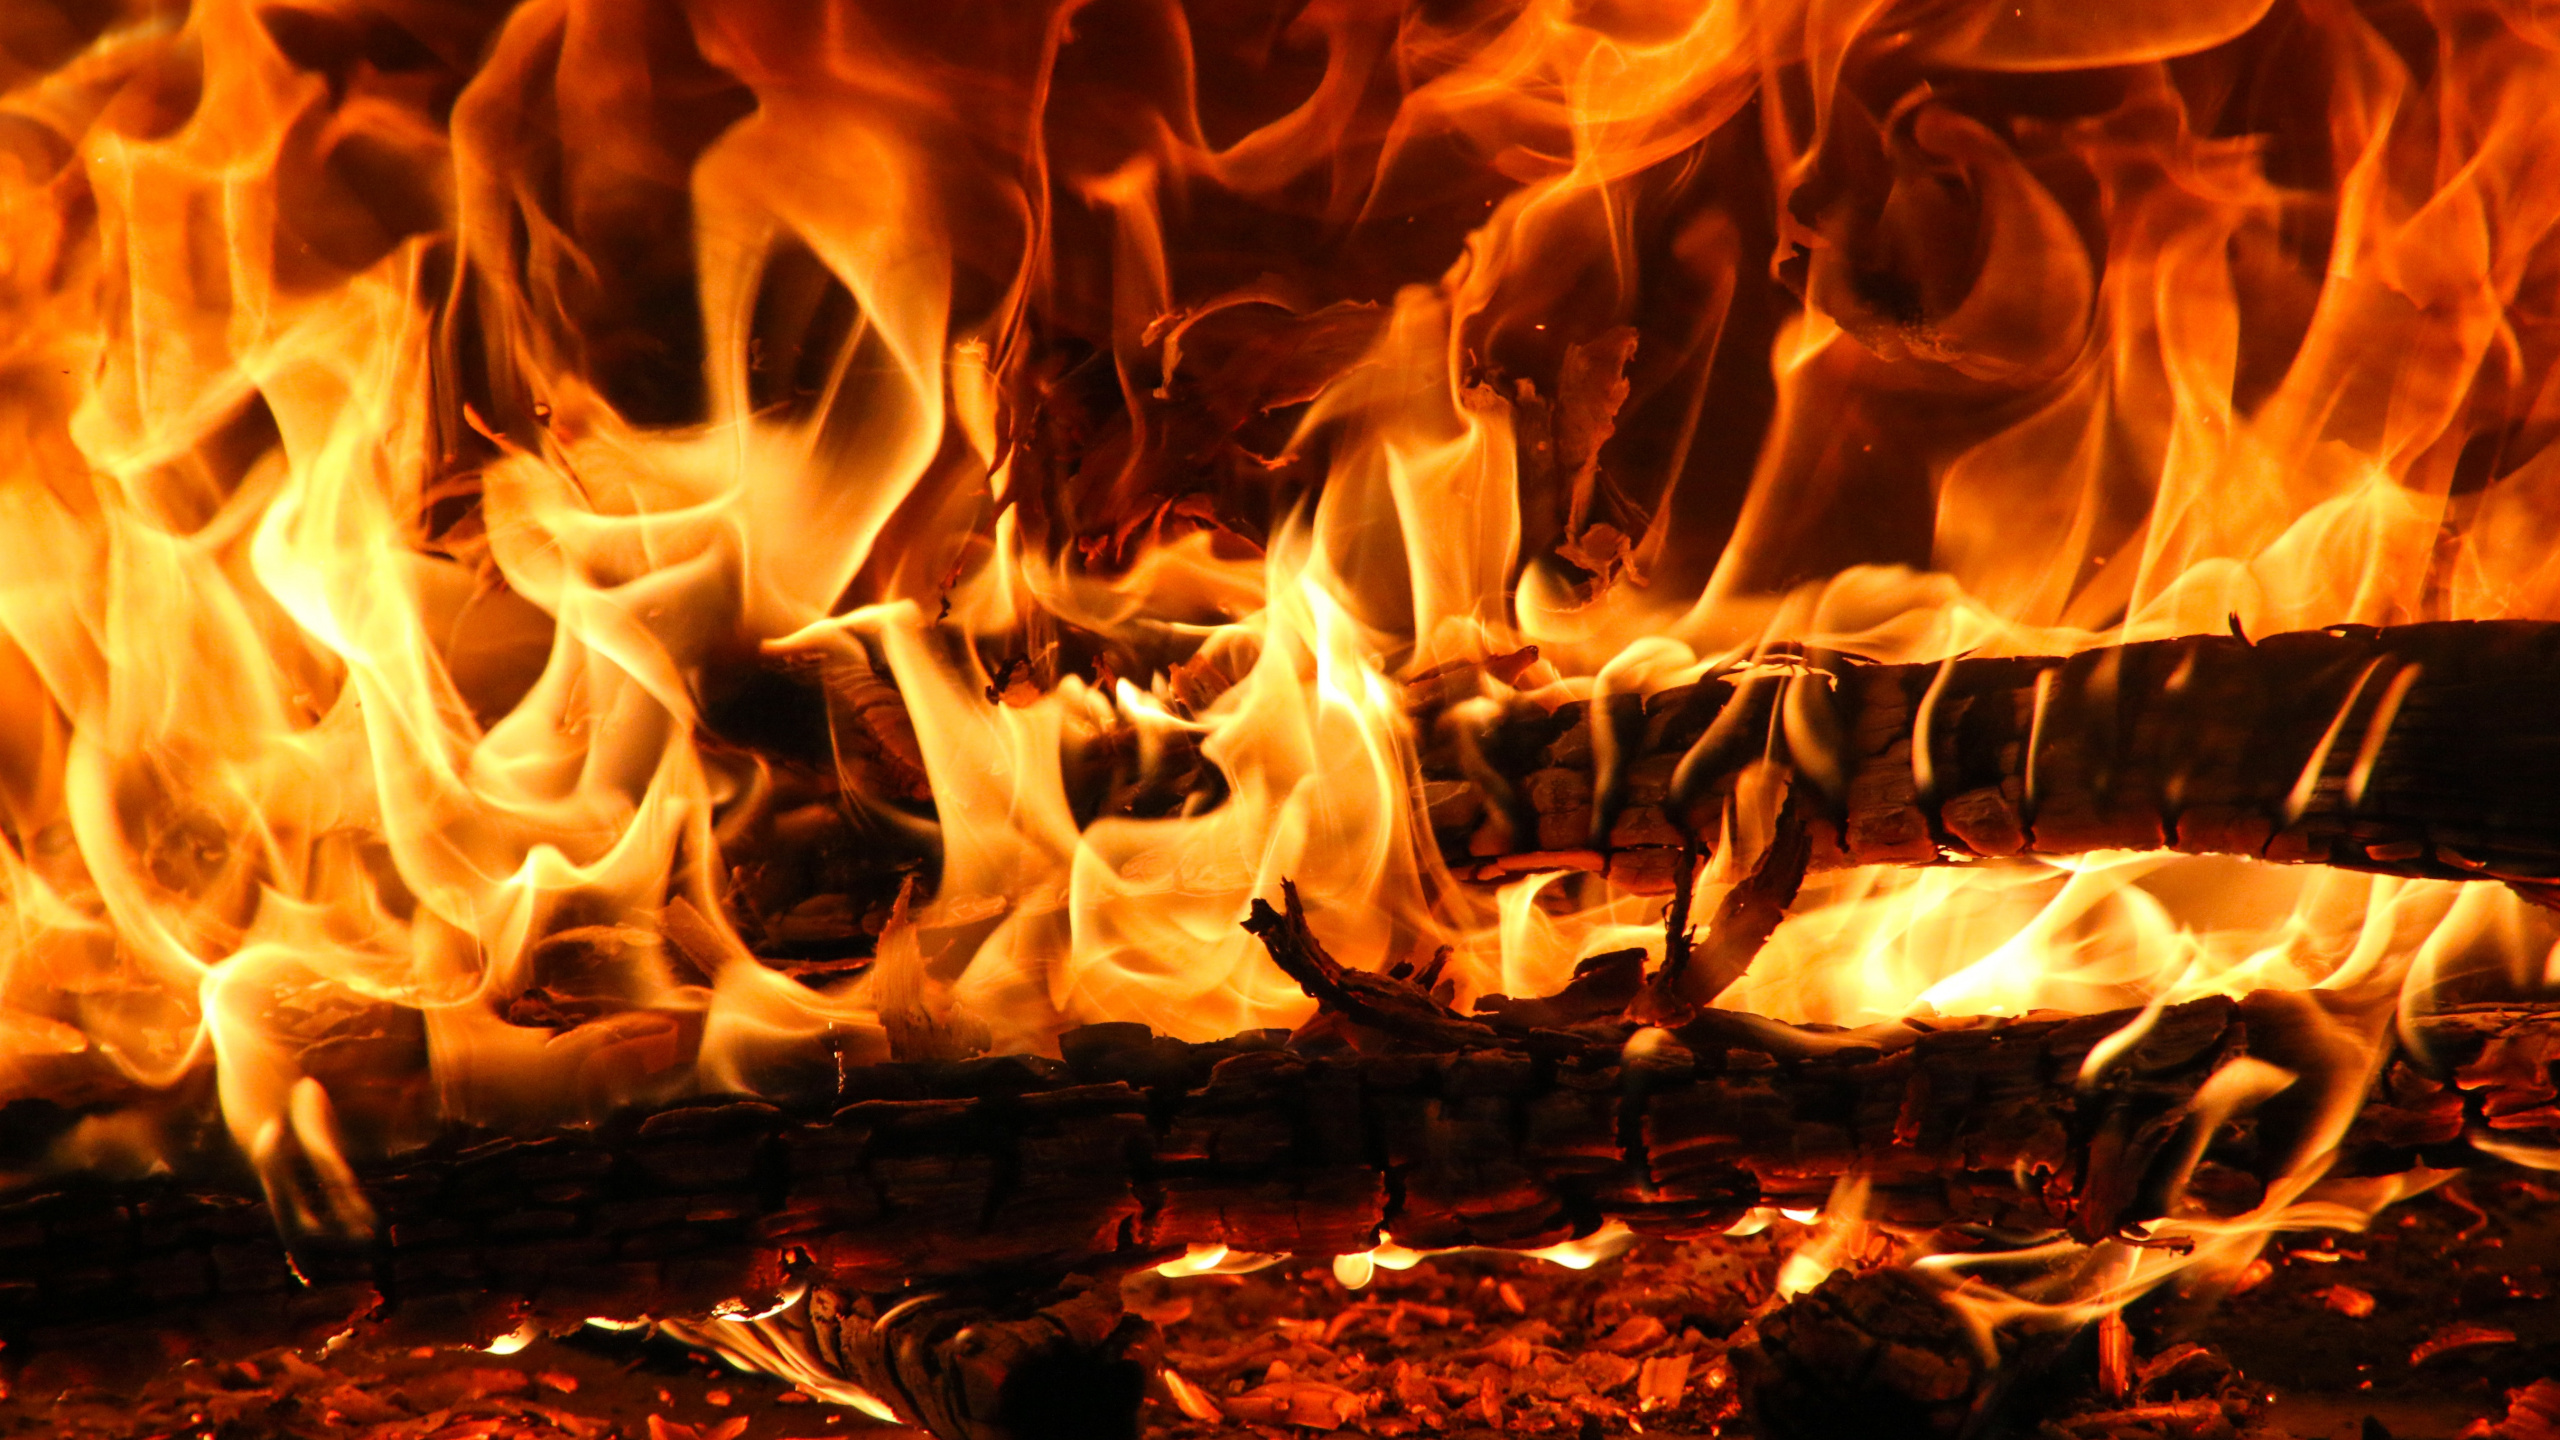 Burning Wood on Brown Soil. Wallpaper in 2560x1440 Resolution